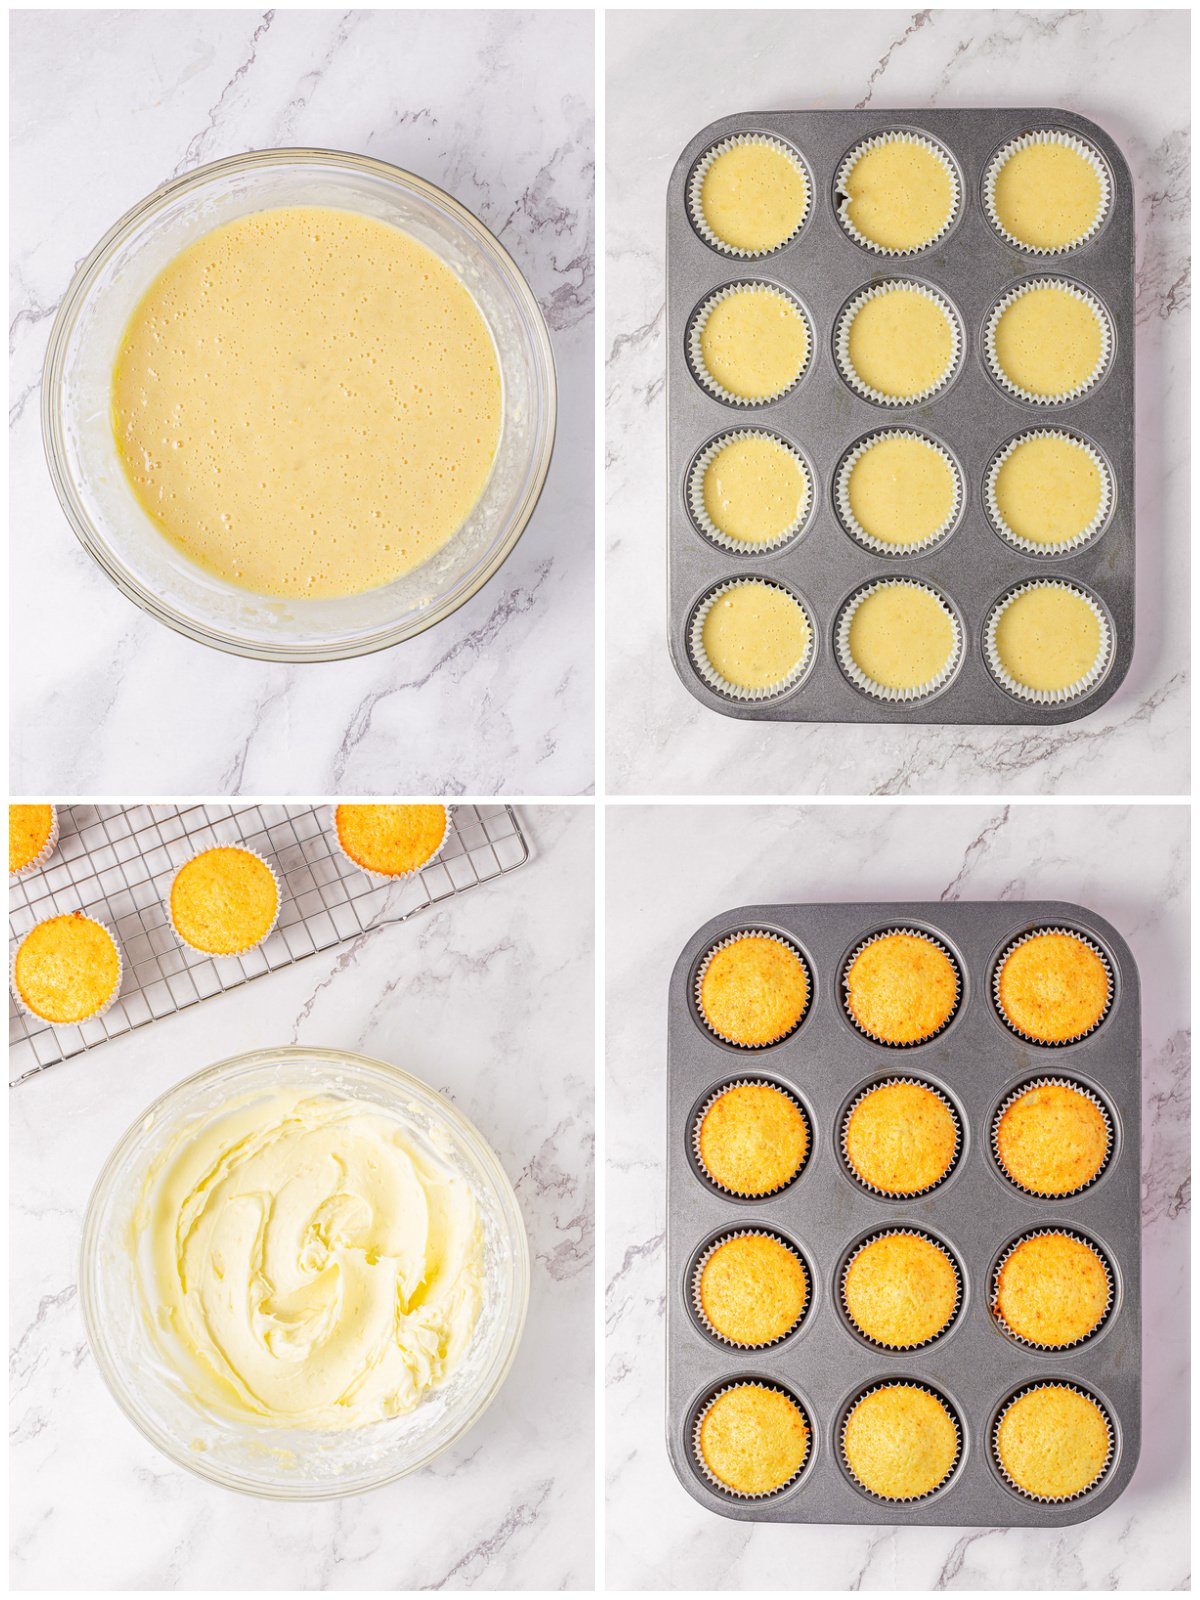 Step by step photos on how to make Pina Colada Cupcakes